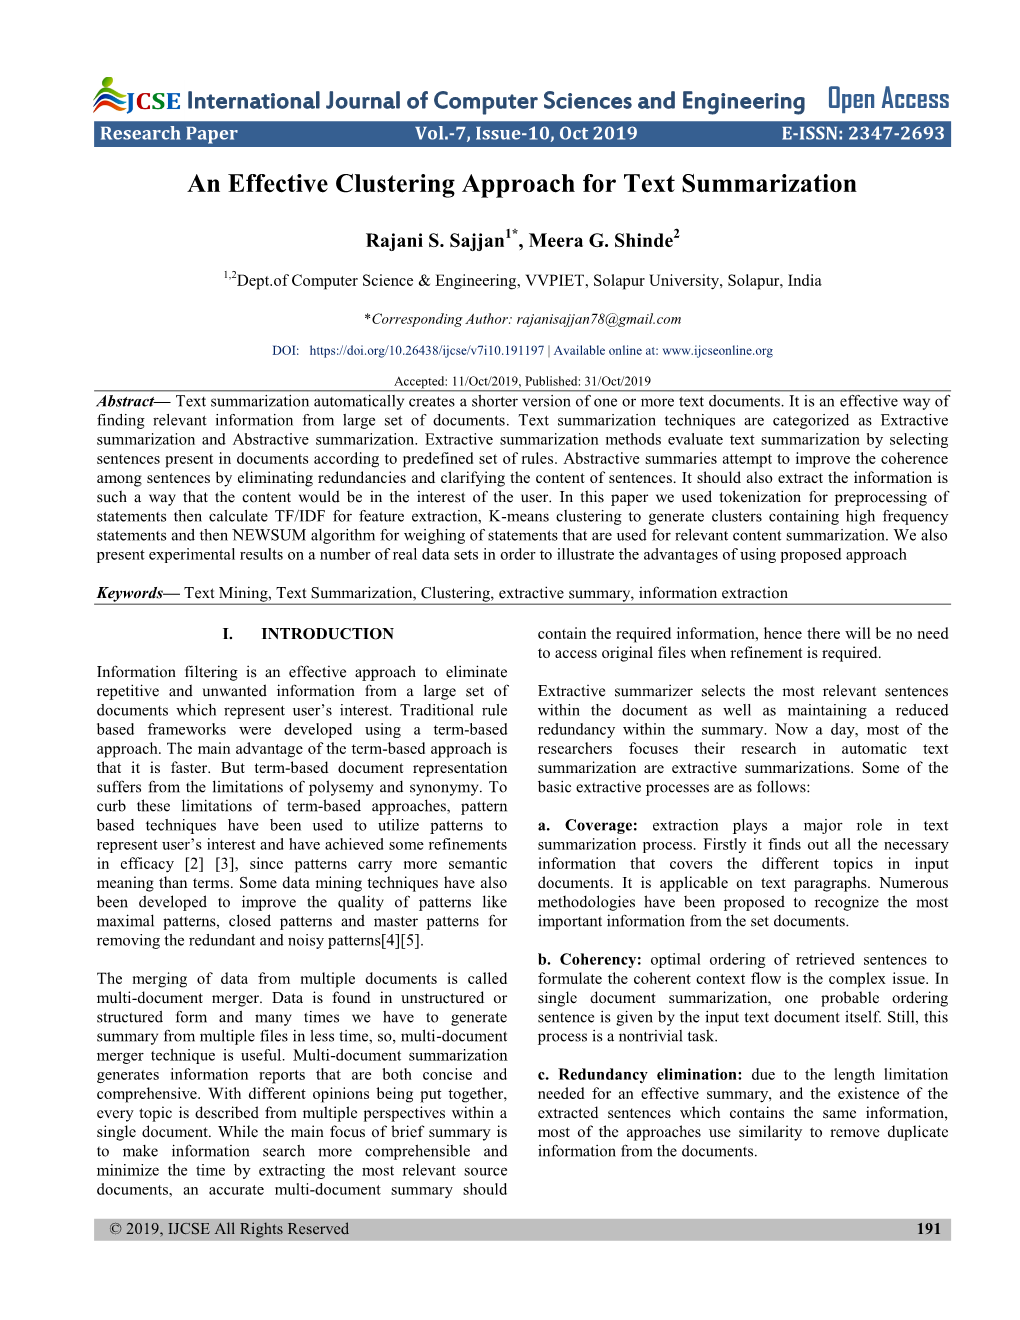 An Effective Clustering Approach for Text Summarization